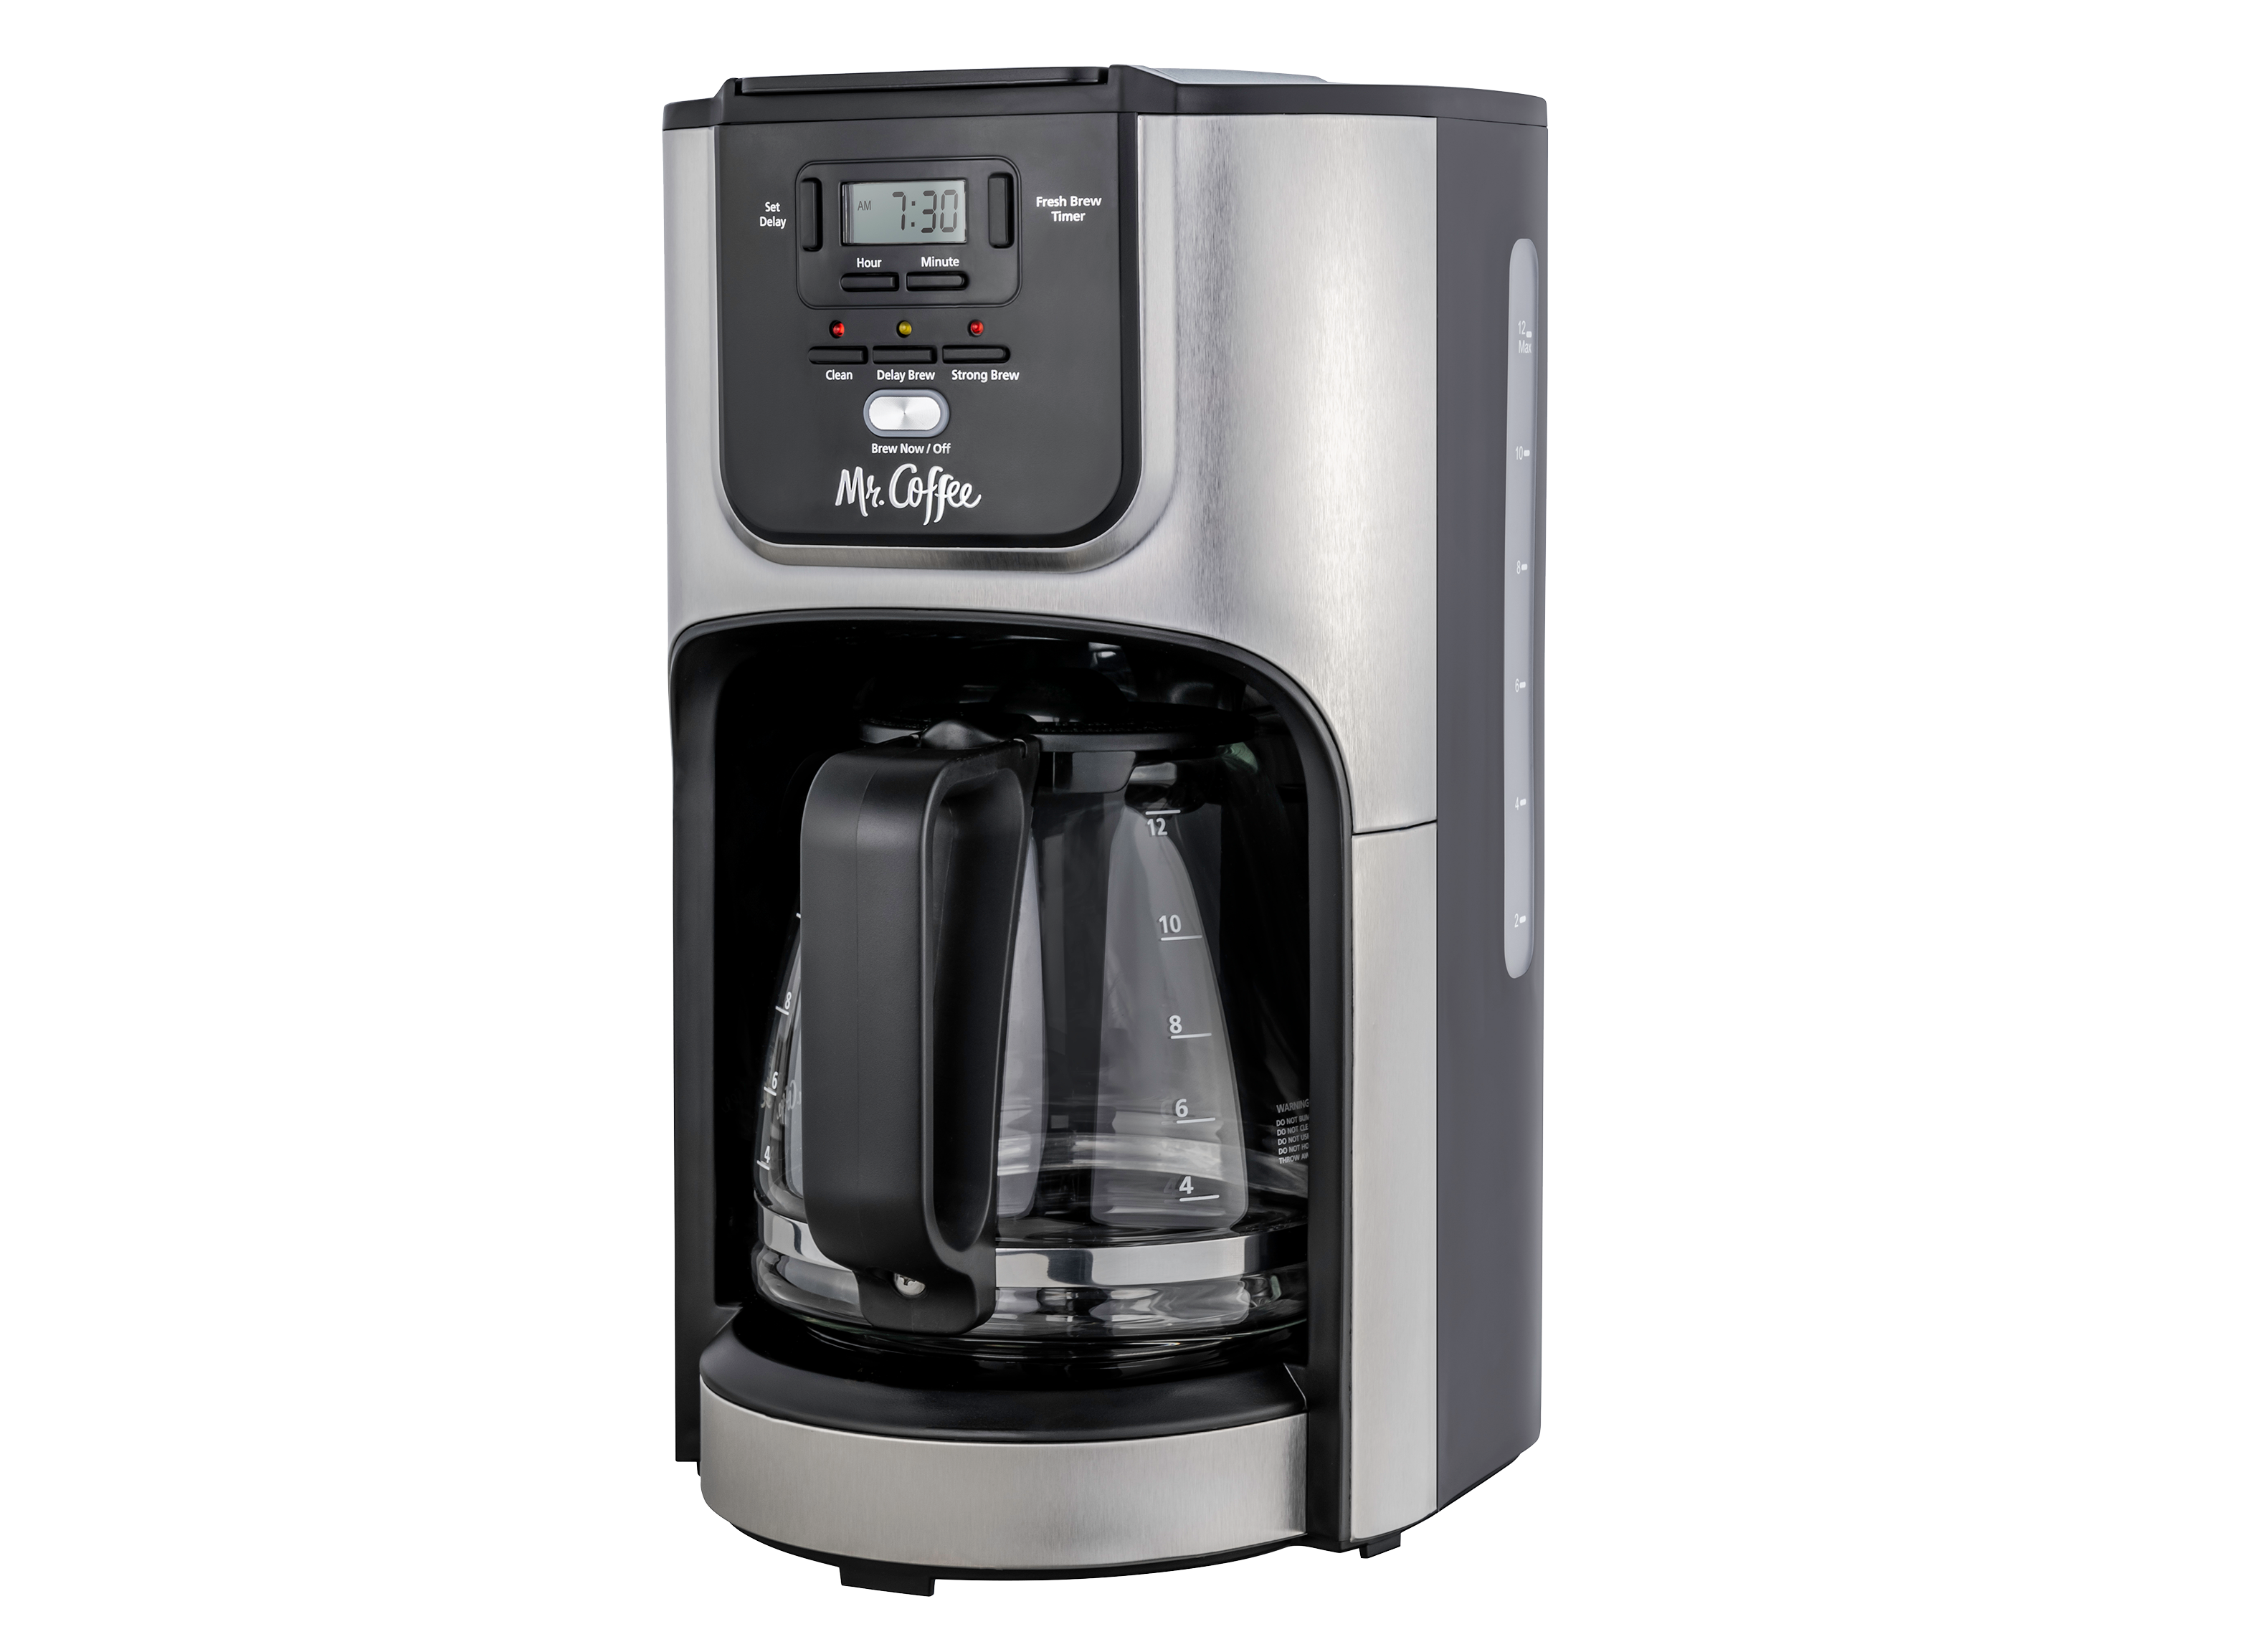 https://crdms.images.consumerreports.org/prod/products/cr/models/403112-drip-coffee-makers-with-carafe-mr-coffee-2131131-programmable-rapid-brew-10018085.png